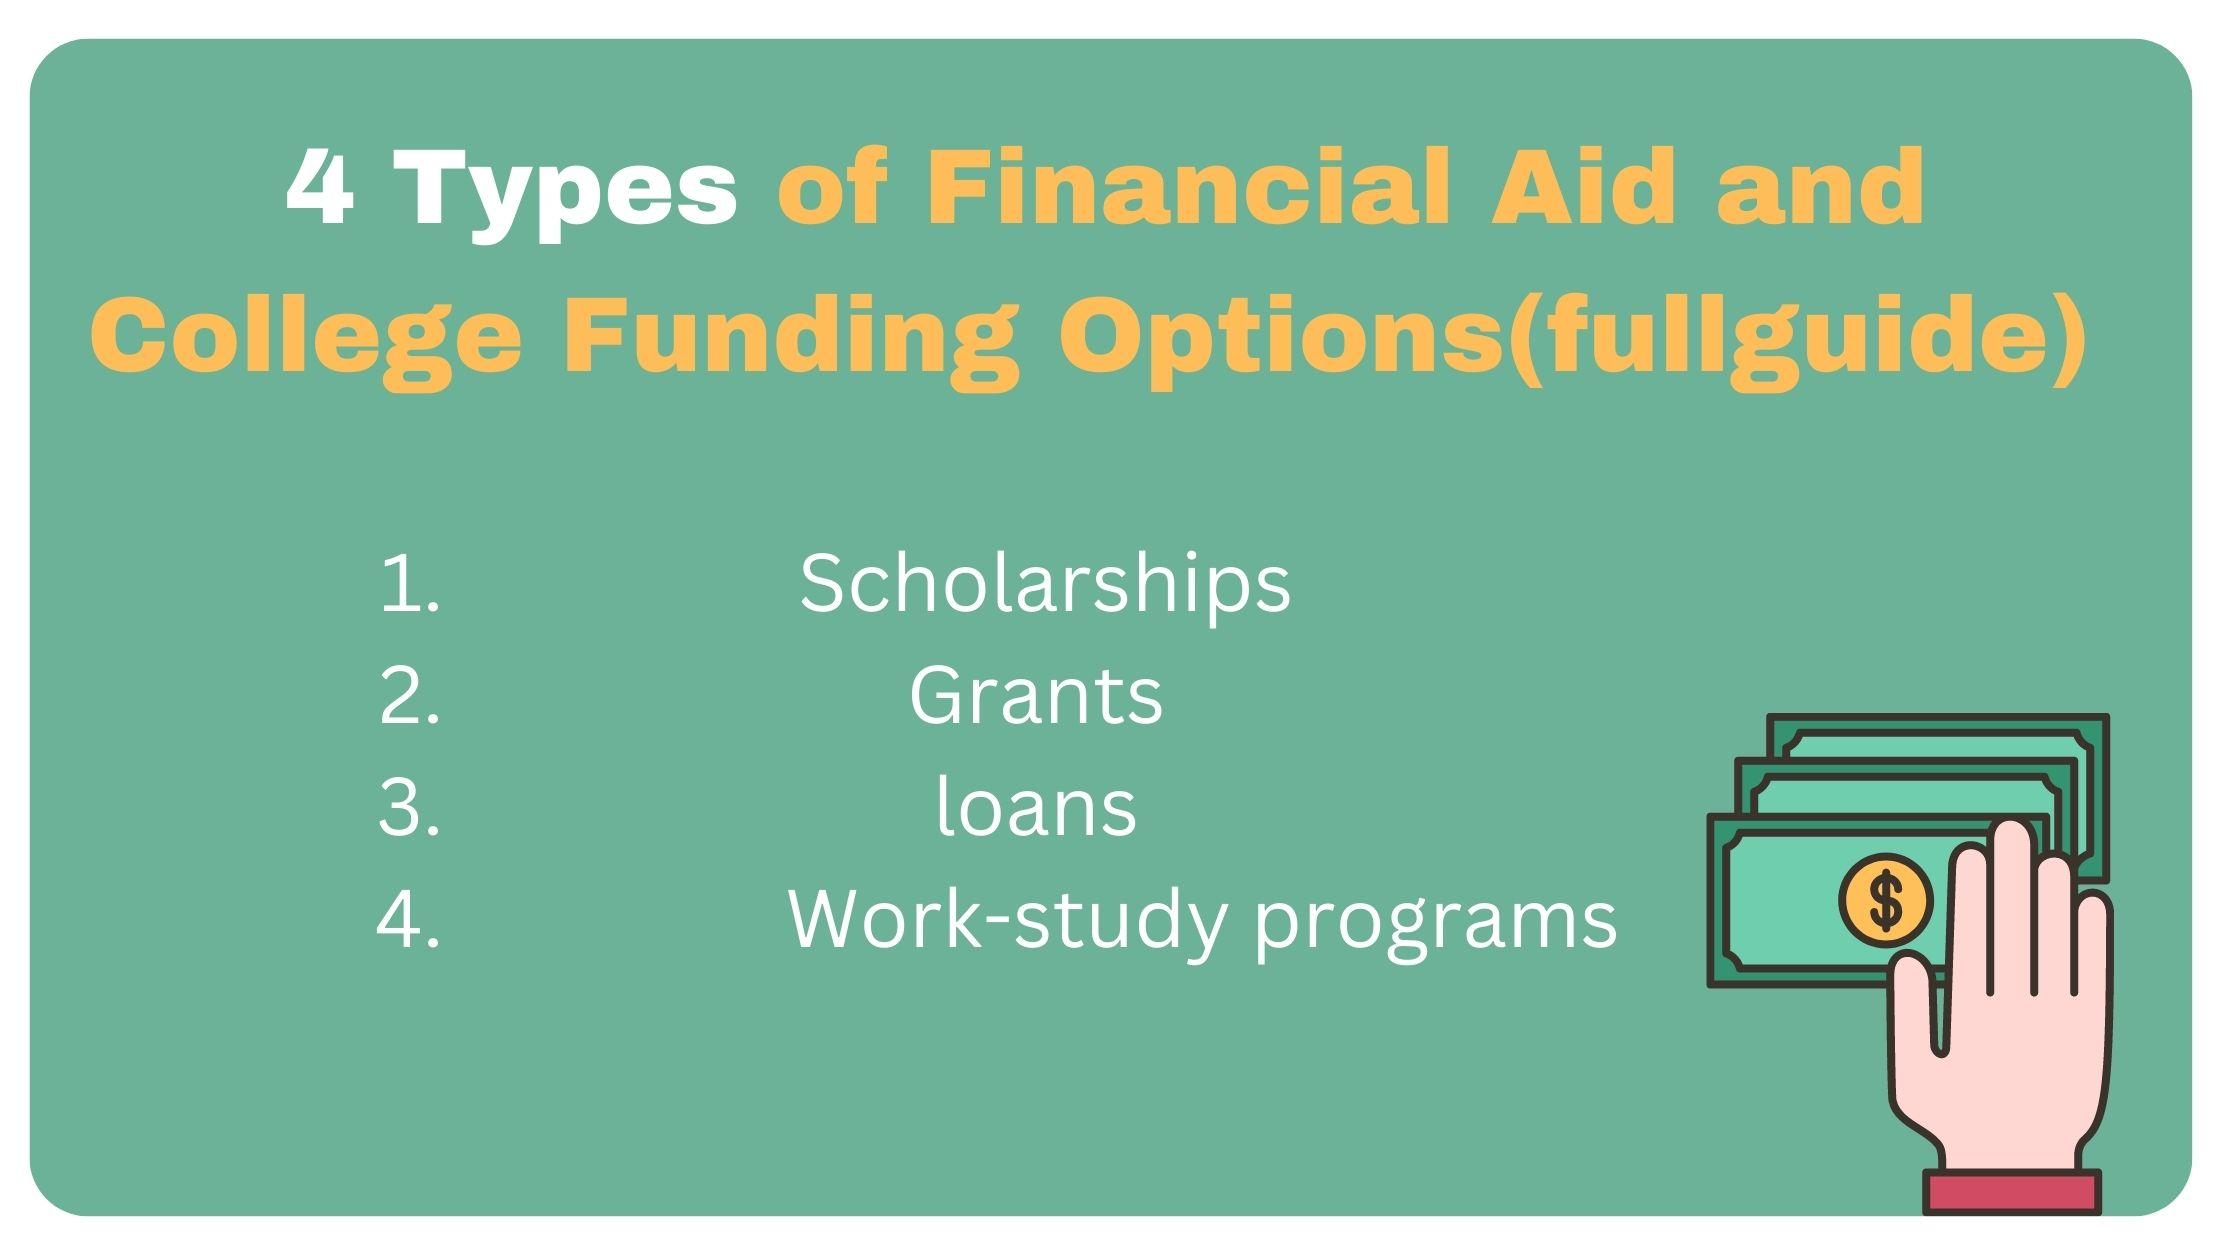 4 Types of Financial Aid and College Funding Options(full guide)